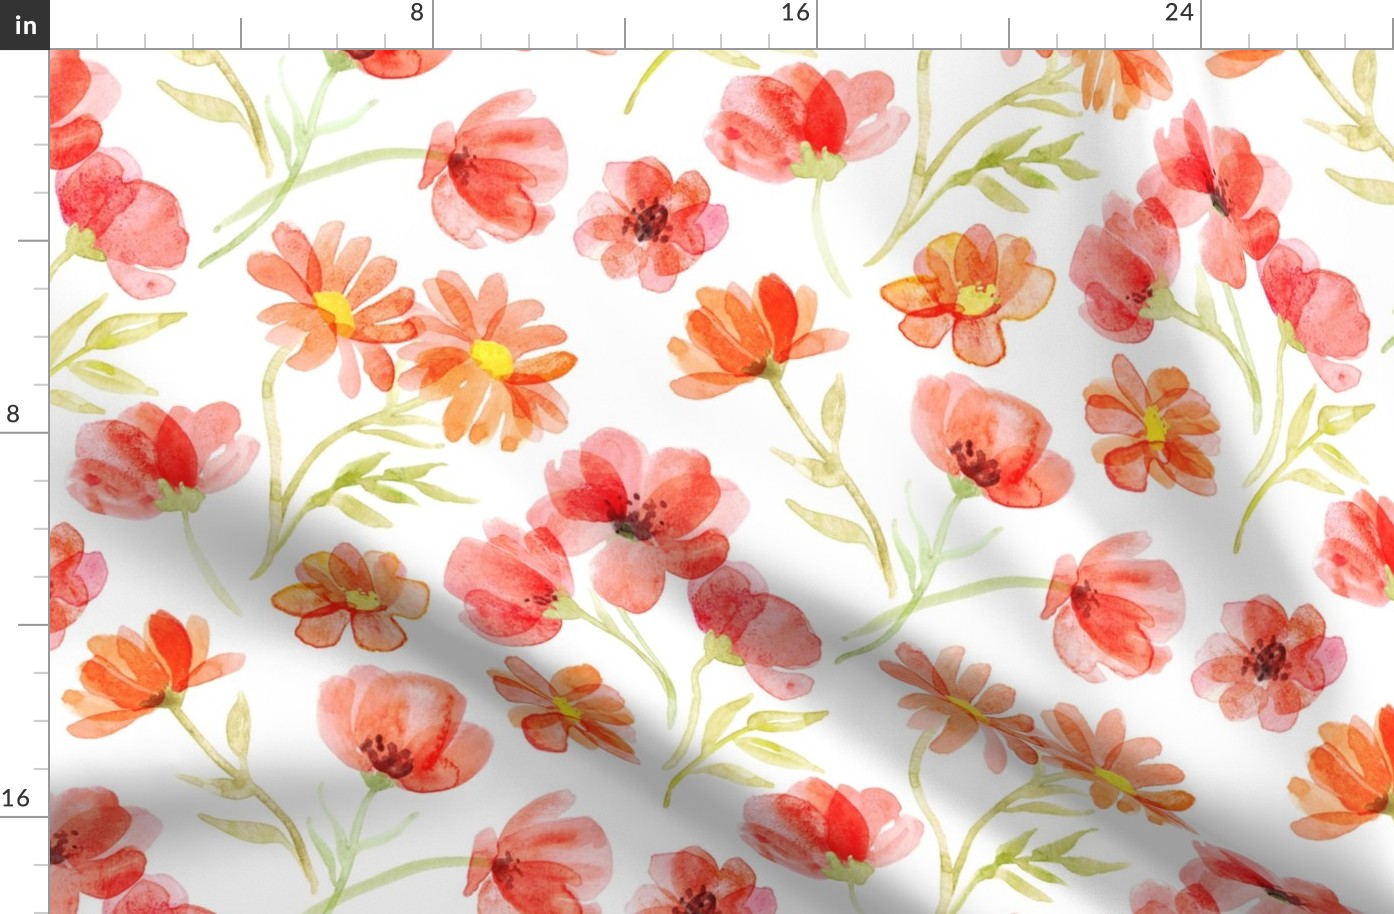 Scattered Watercolor Poppies and Chrysanthemums in Peach Coral on White - large